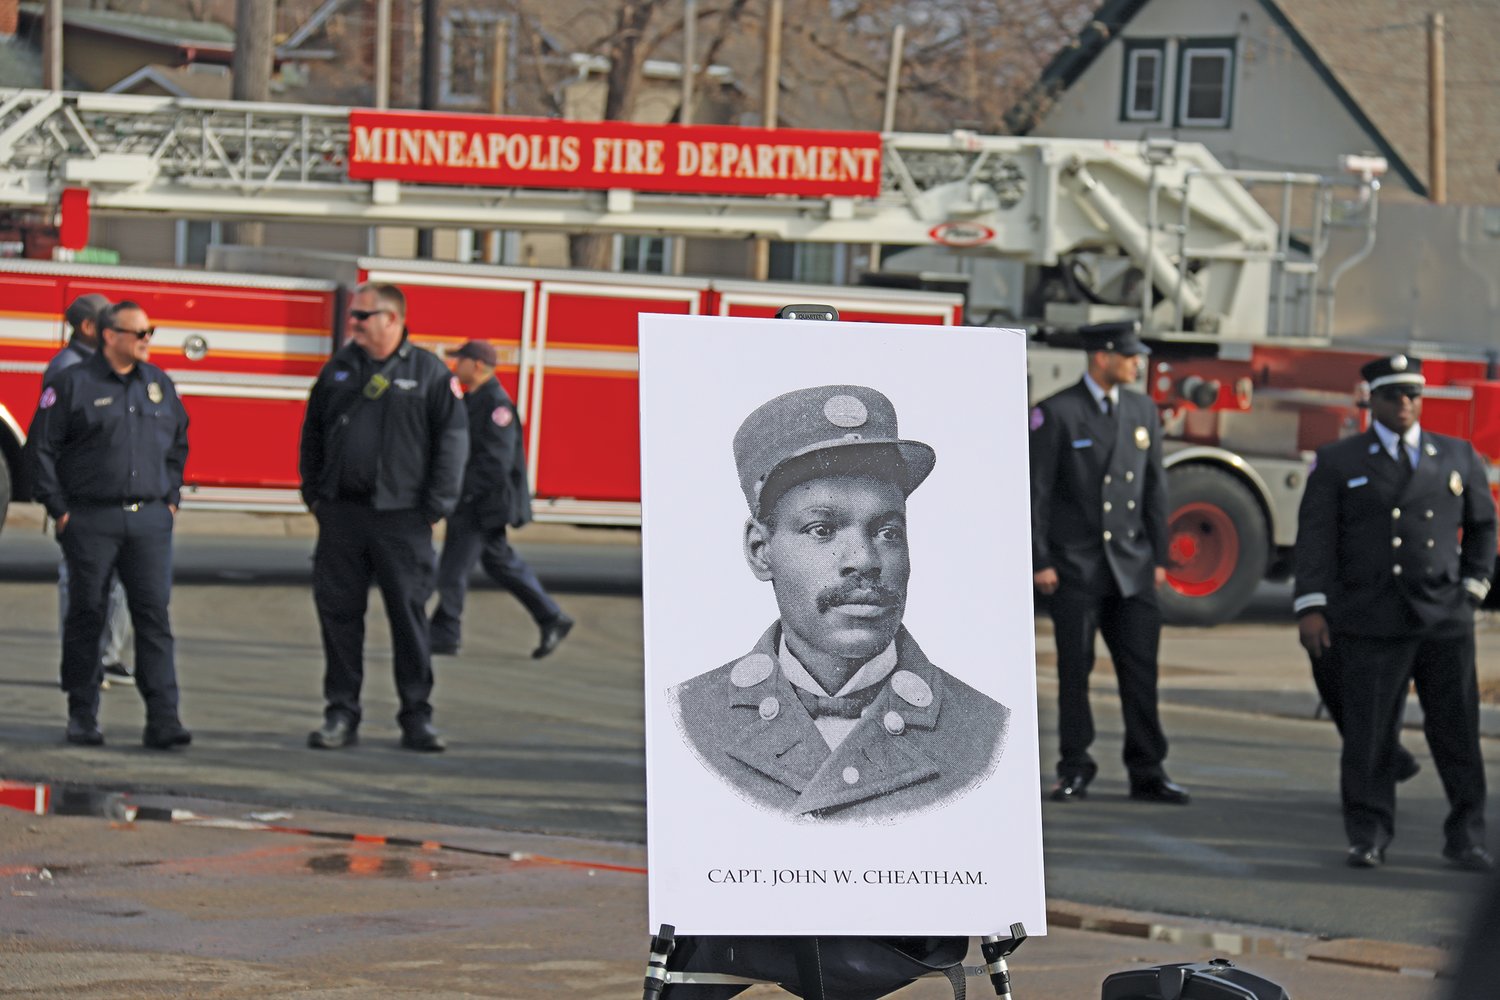 A renaming ceremony was held on March 17, 2022 at Dight Ave. and 38th Street as the name changed to Cheatham Ave. to honor the city's first Black fire captain. After Cheatham, there wasn't another one in Minneapolis until the 1990s. The fire department was not desegregated until the Minneapolis Legal Aid Society filed a lawsuit in 1971 that former Judge LaJune Lange worked on when she was a law clerk for U.S. District Judge Earl Larson. Lange has helped uncover the history of Cheatham and fire station #24. (Photo by Tesha M. Christensen)